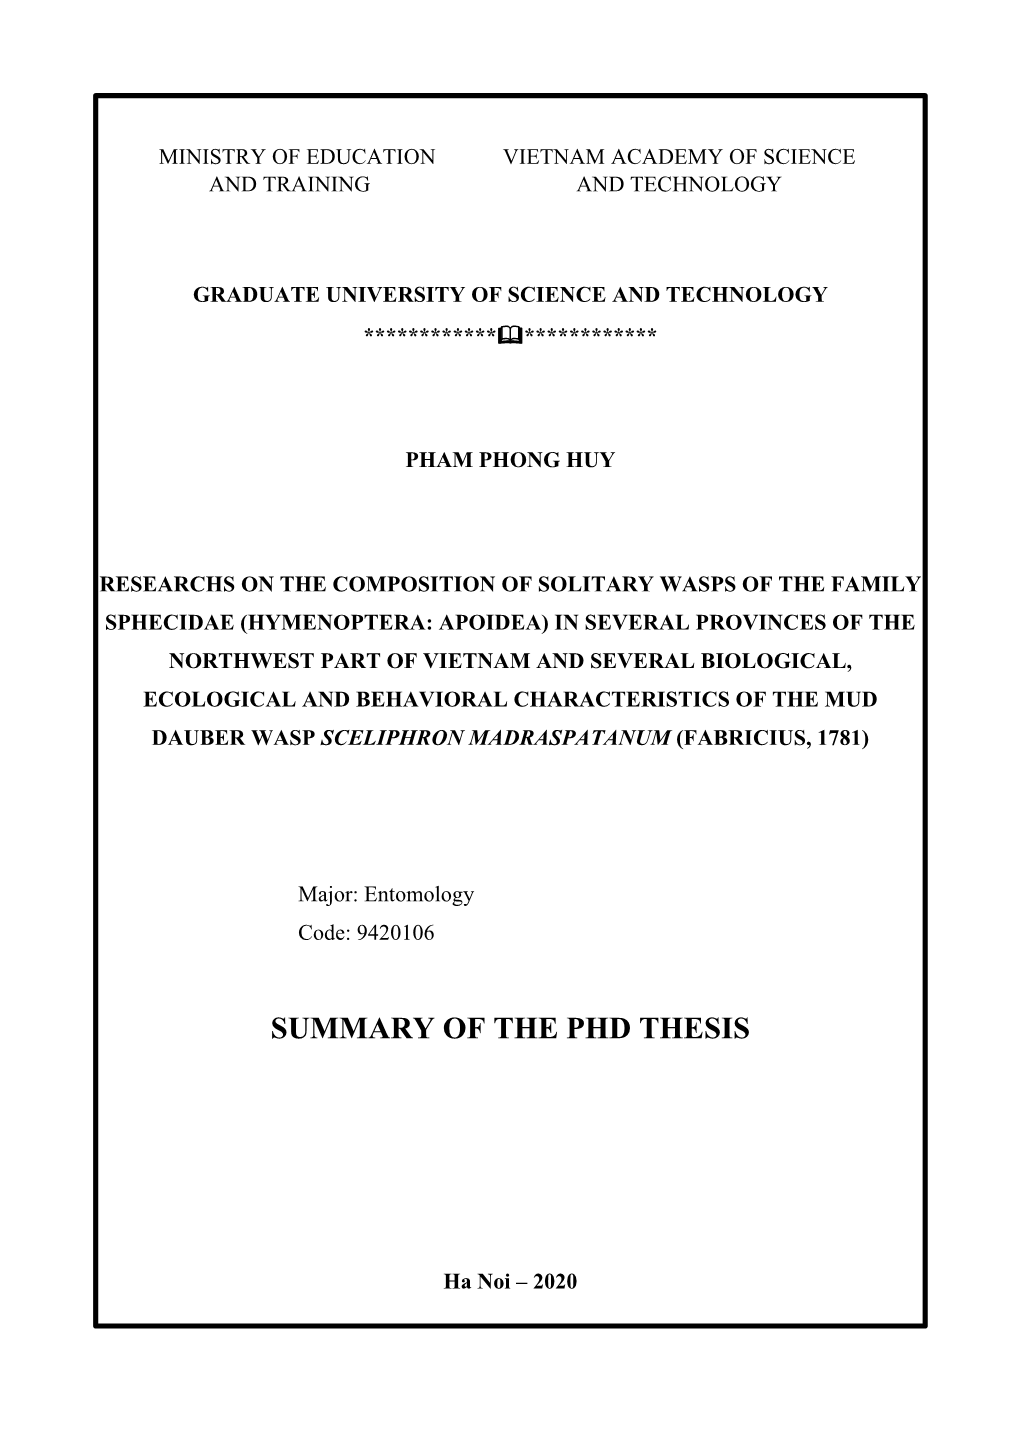 Summary of the Phd Thesis